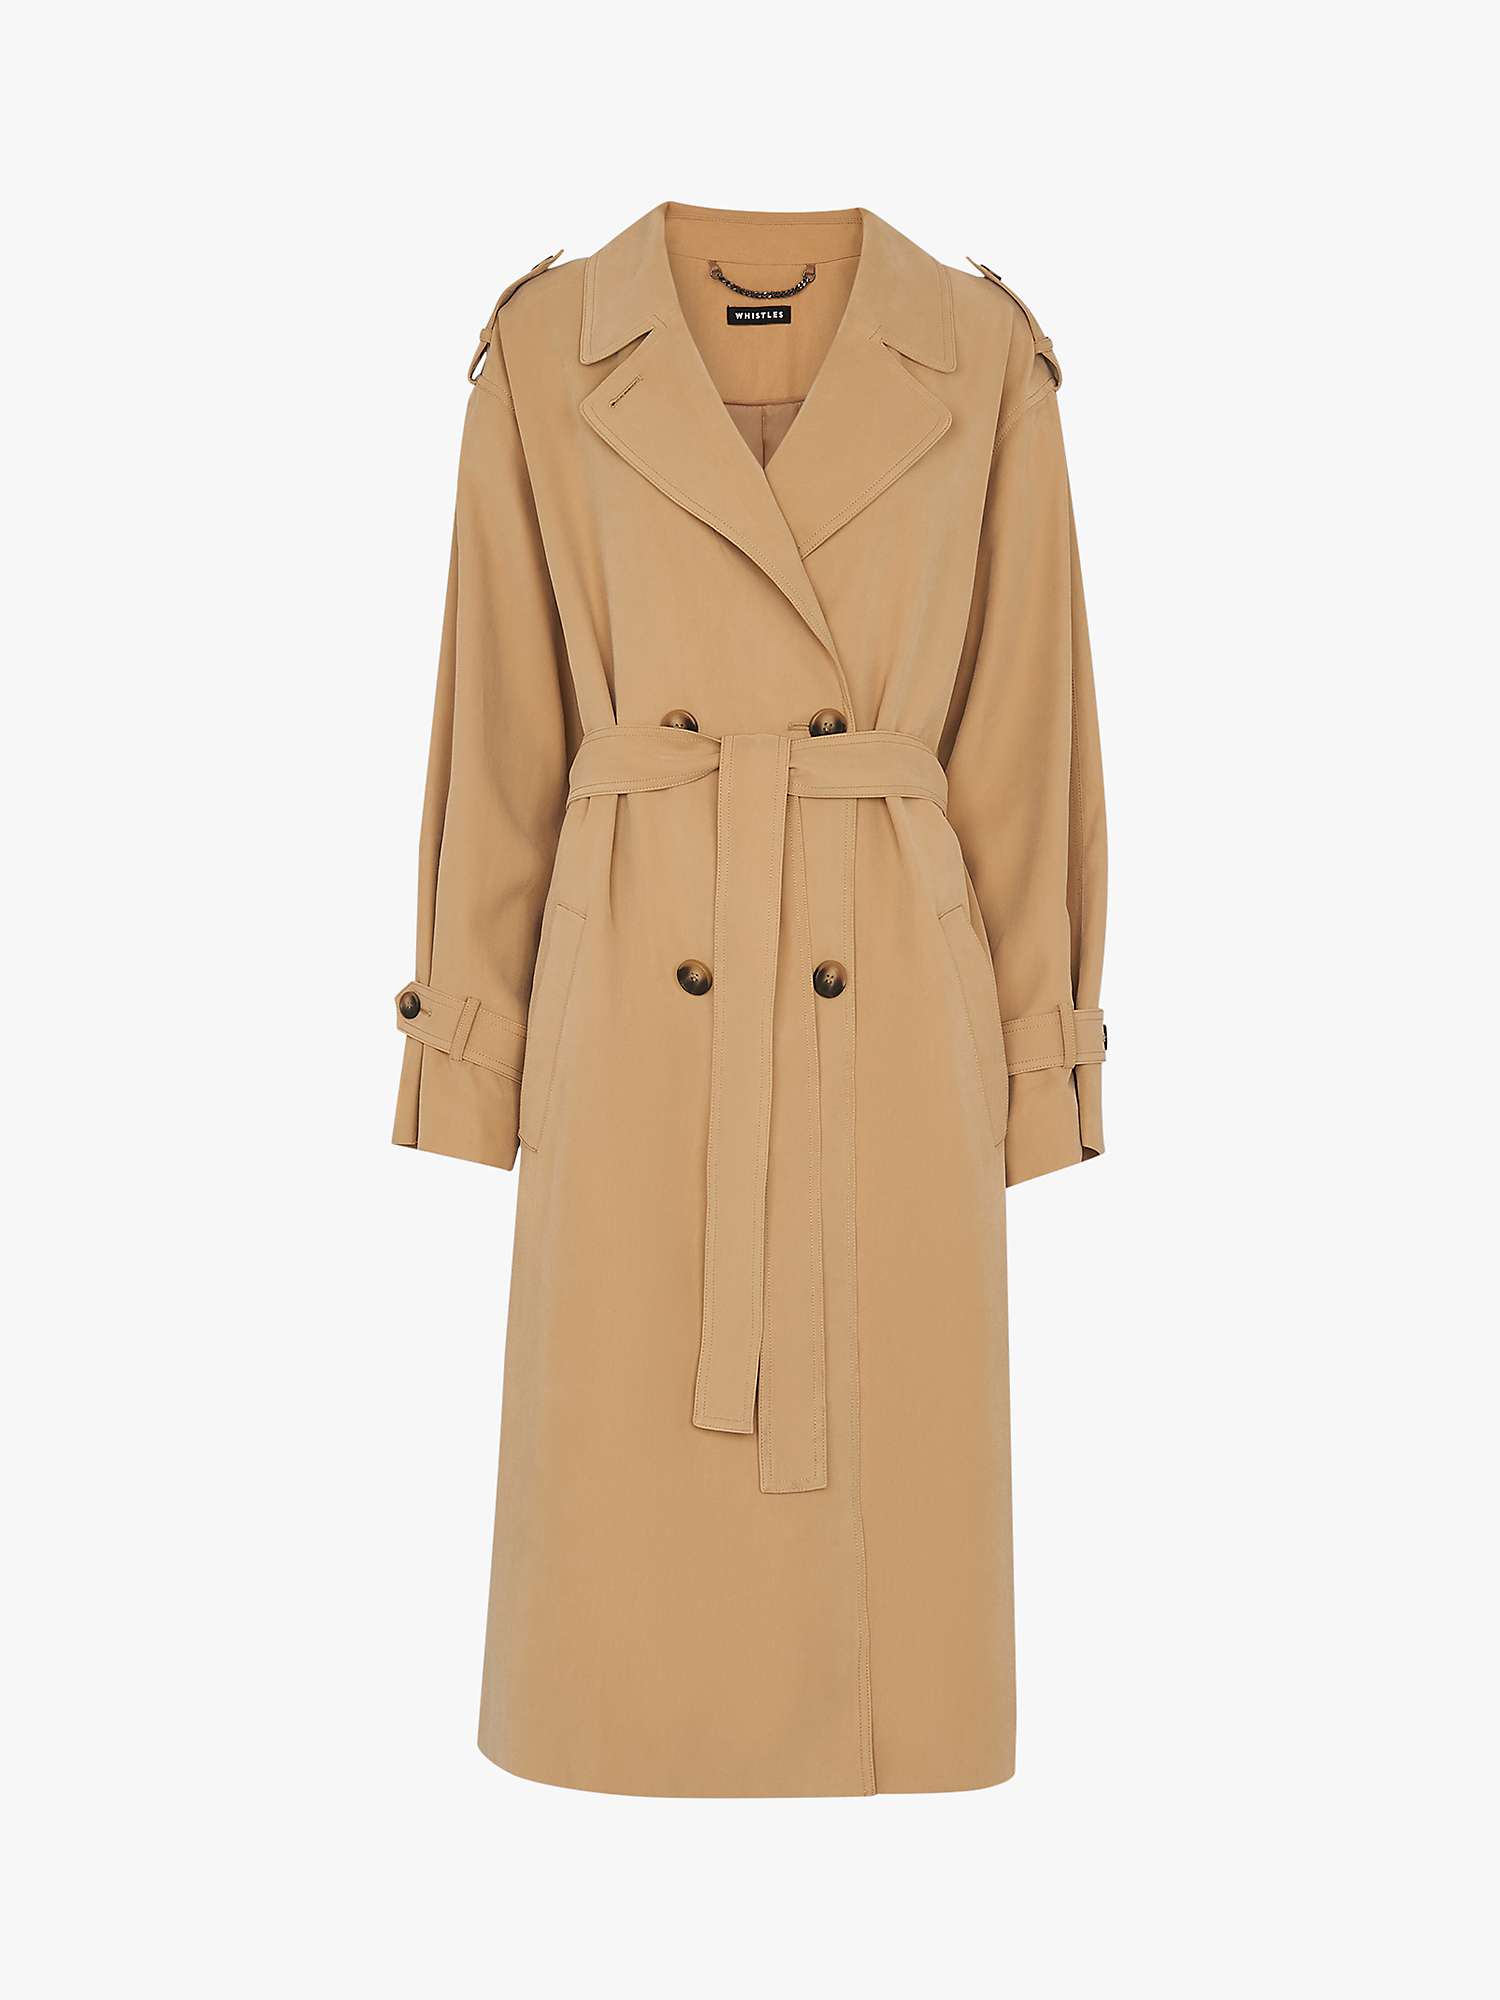 Buy Whistles Petite Riley Double Breasted Trench Coat, Beige Online at johnlewis.com